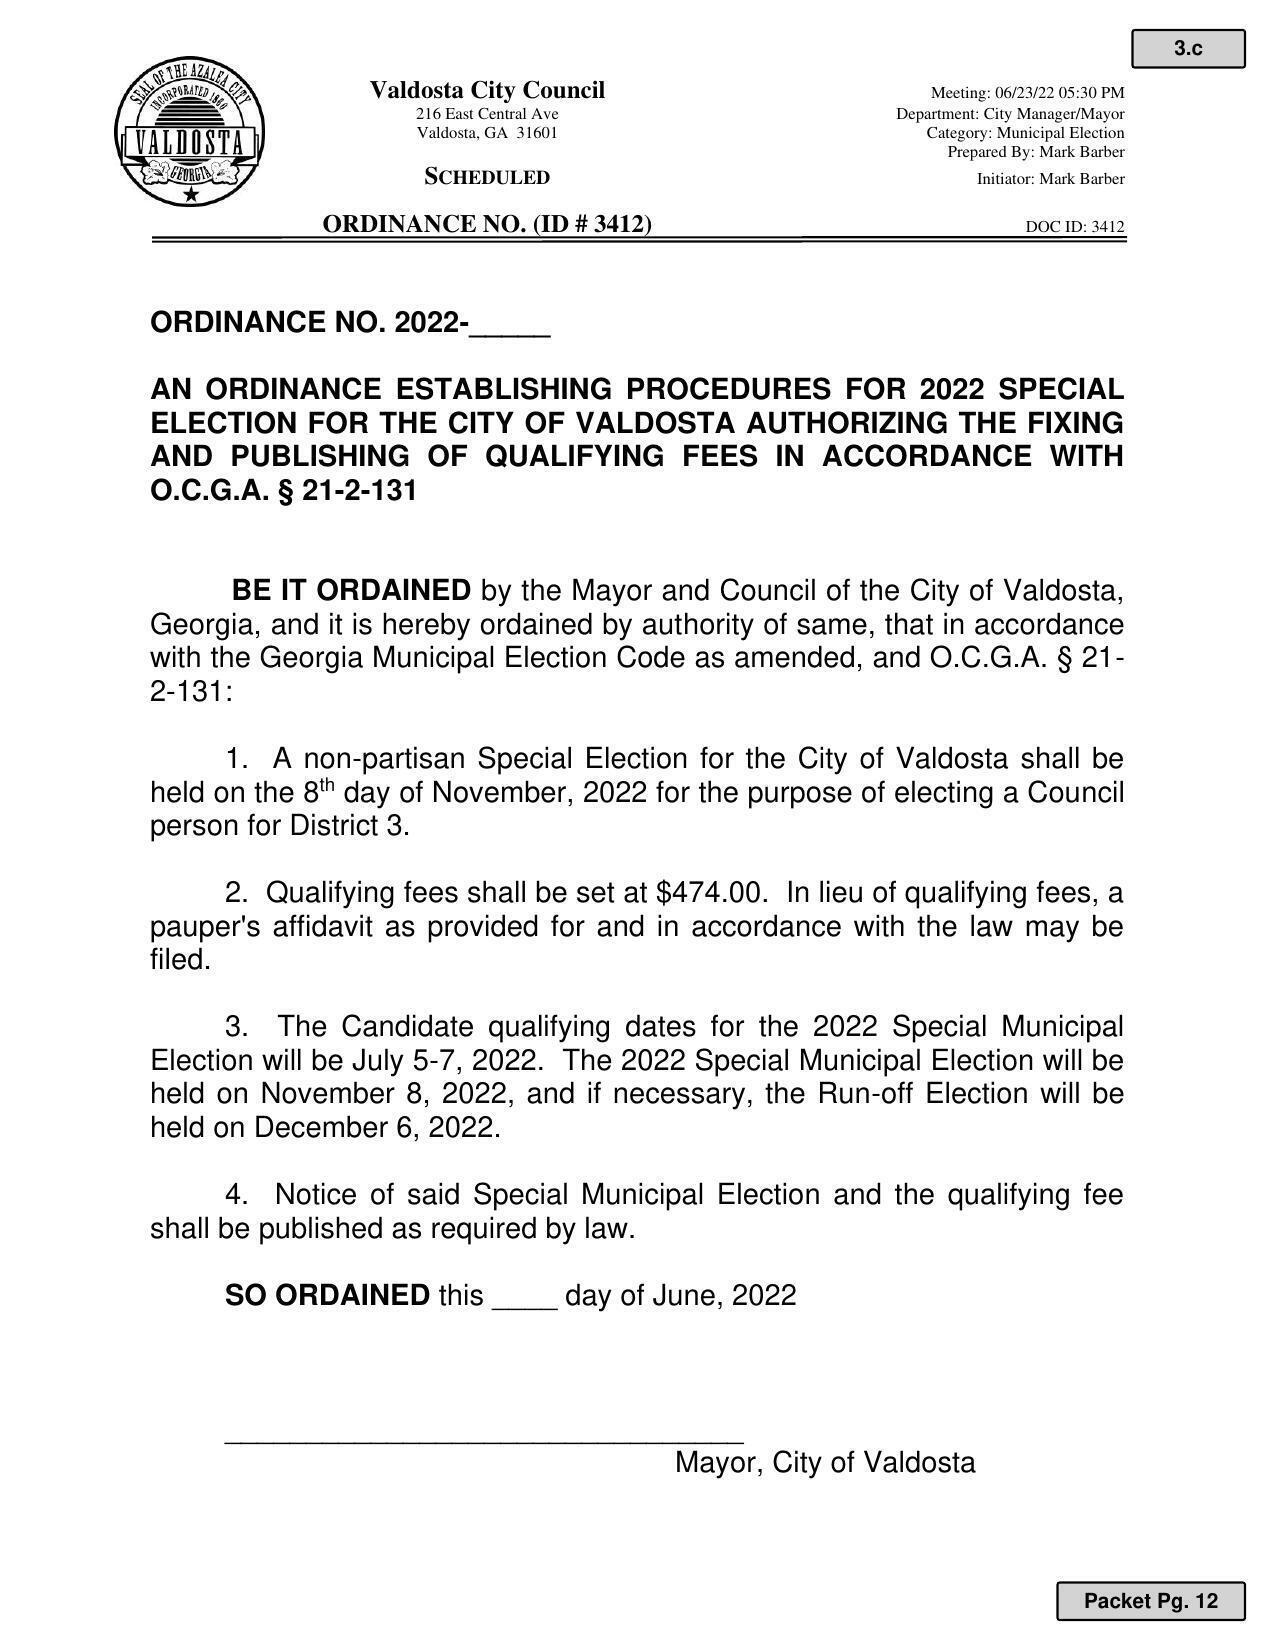 The ordinance: A non-partisan Special Election for the City of Valdosta shall be held on the 8 th day of November, 2022 for the purpose of electing a Council person for District 3.